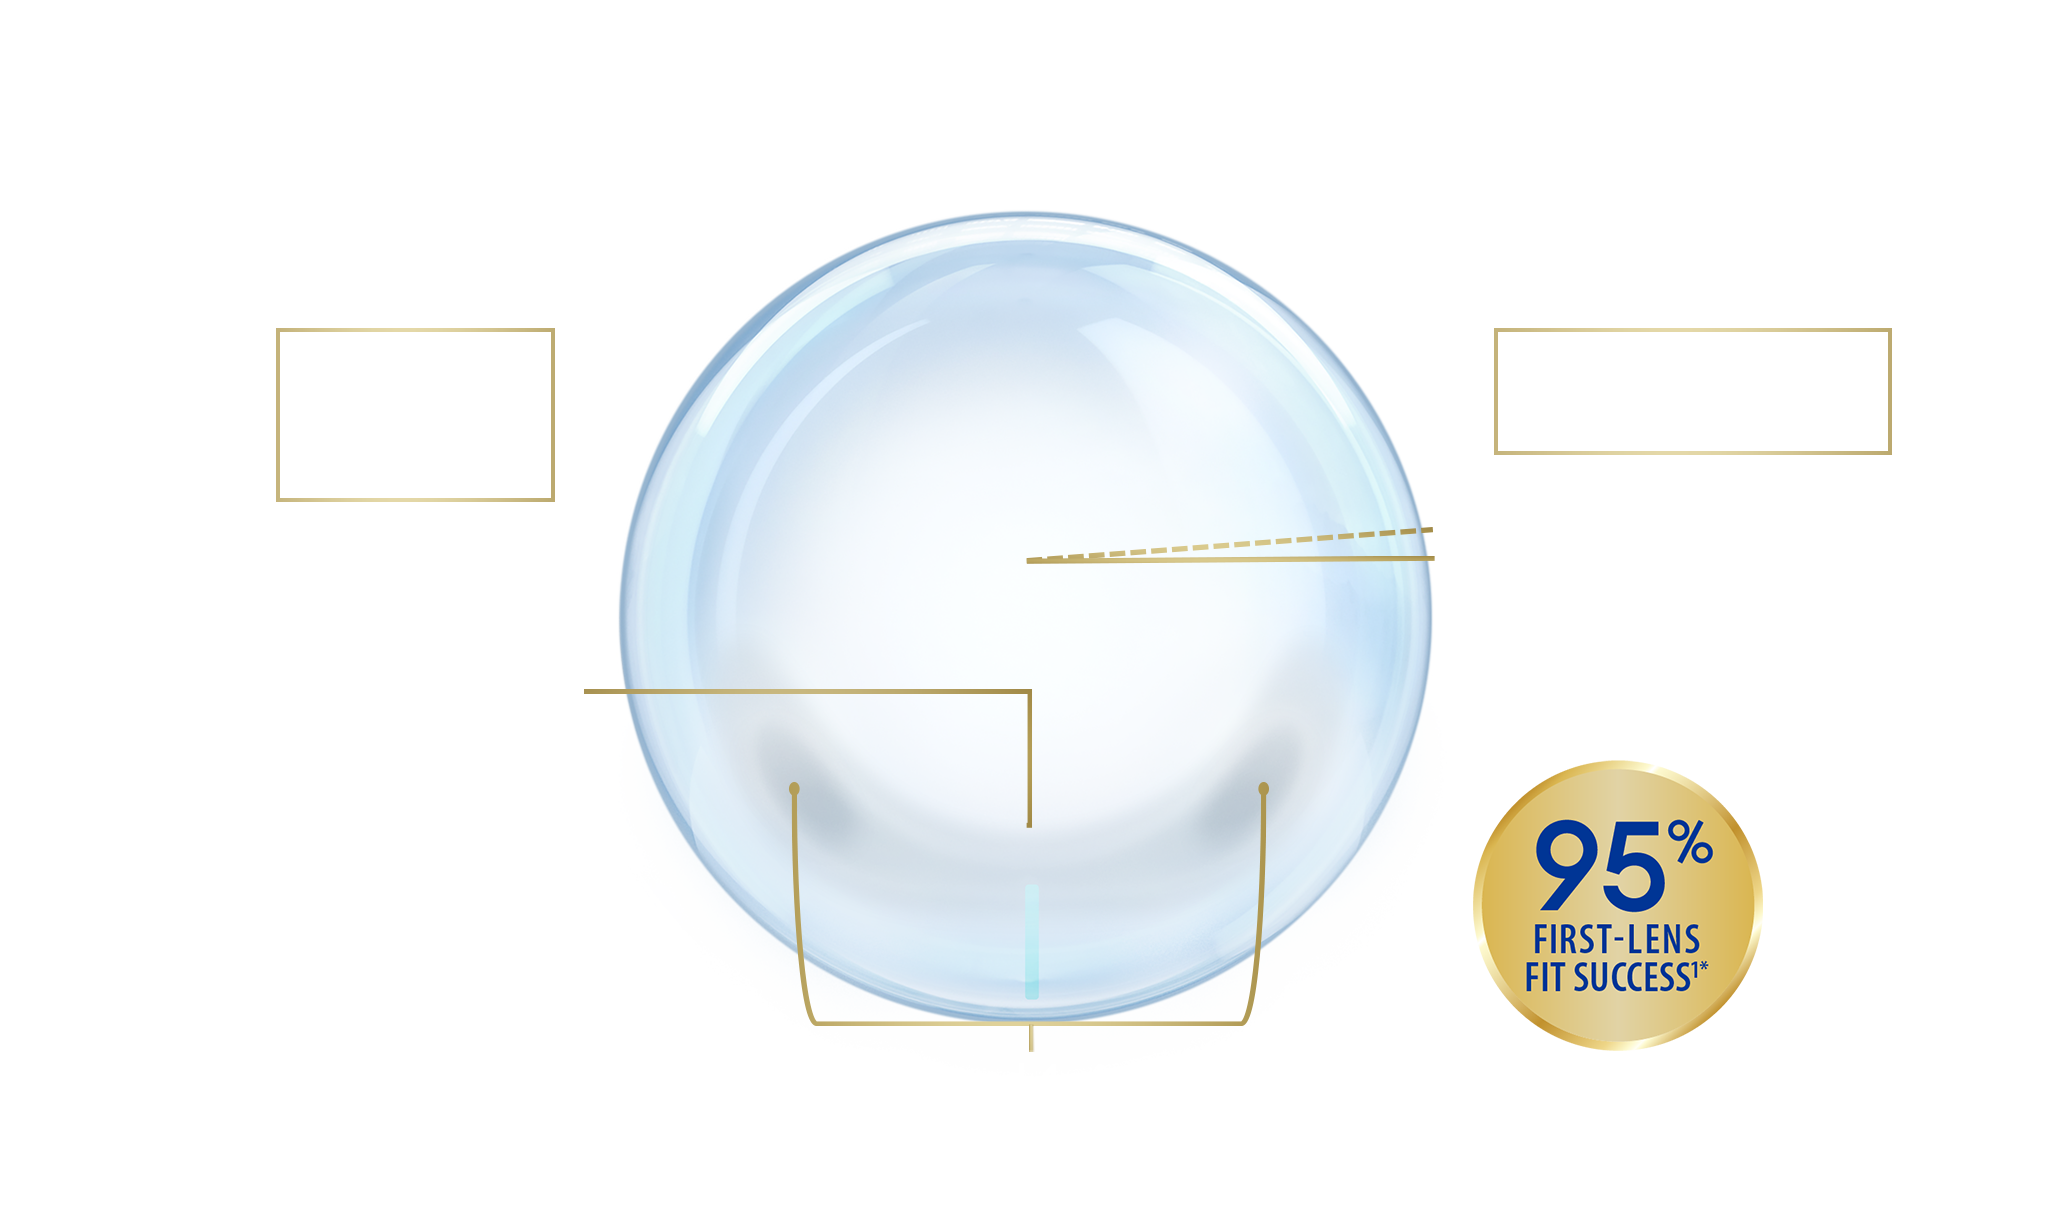 Proven lens design for a predictable fit4*